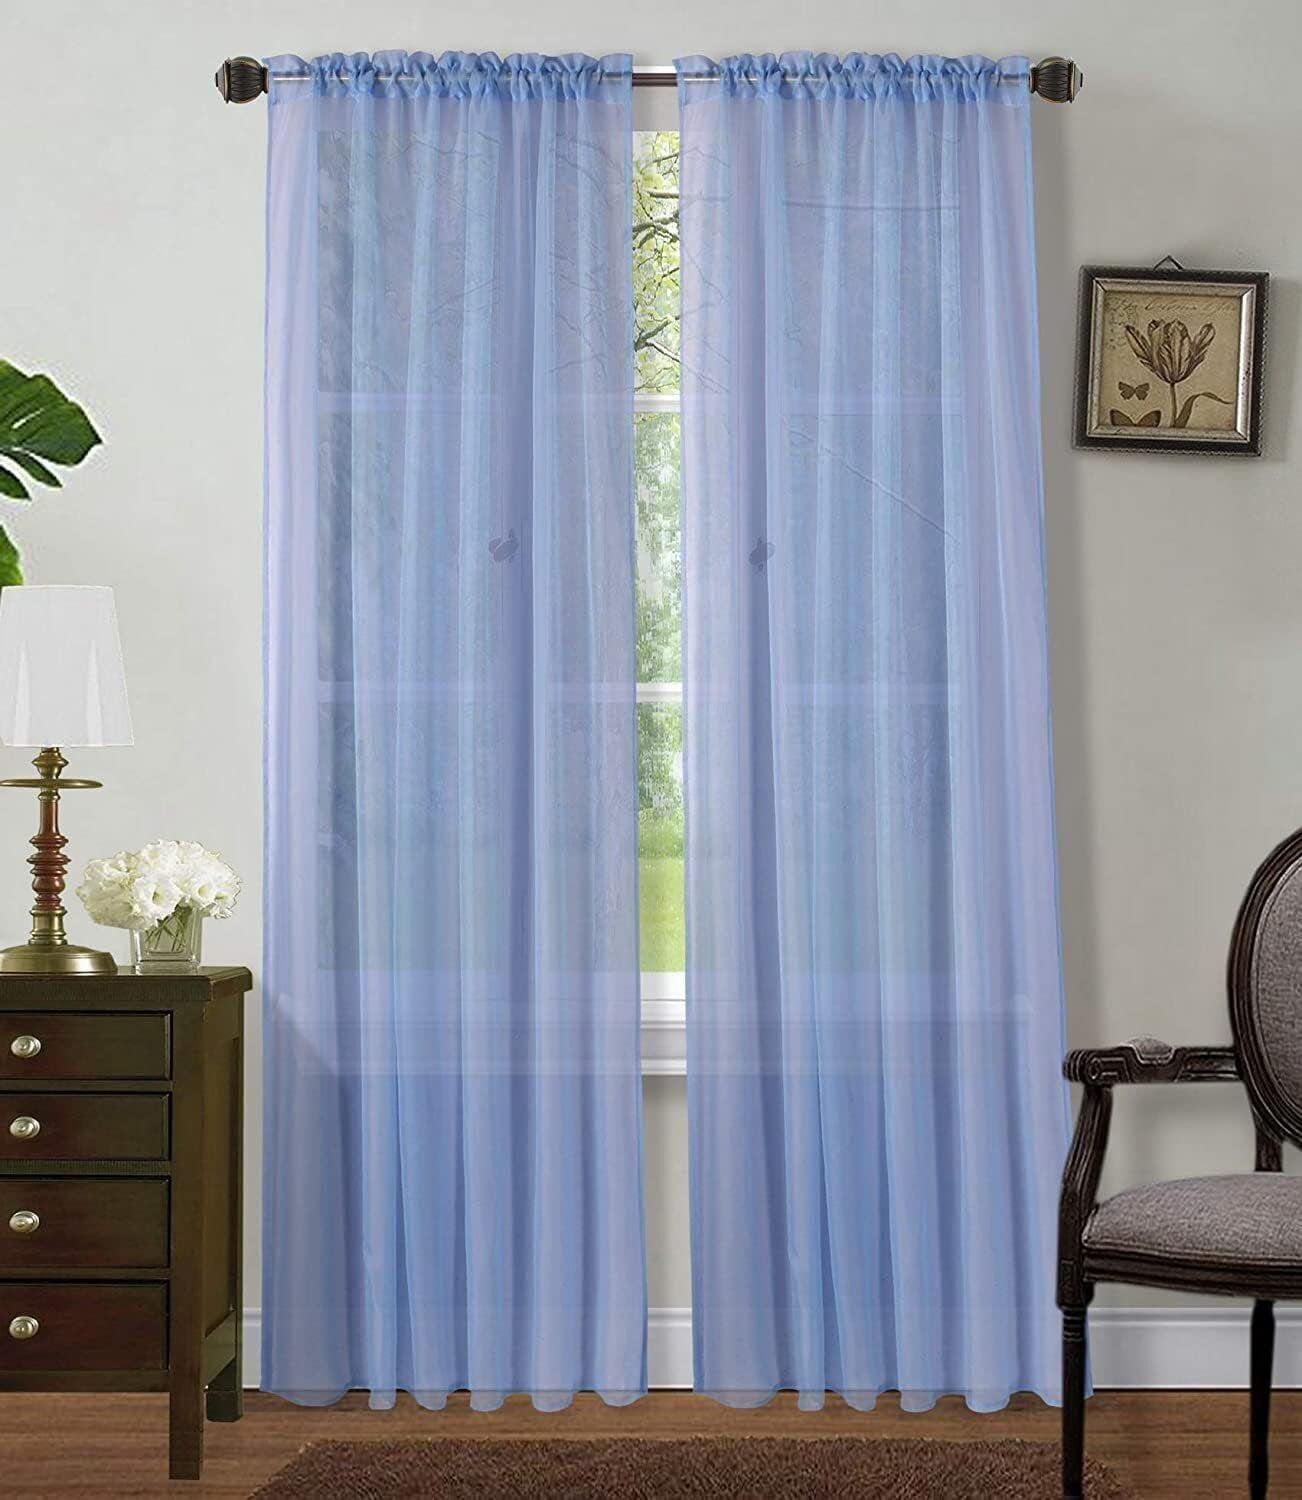 2 Piece Sheer Luxury Curtain Panel Set for Kitchen/Bedroom/Backdrop 84" Inches Long (White )  Jasmine Linen Light Blue  